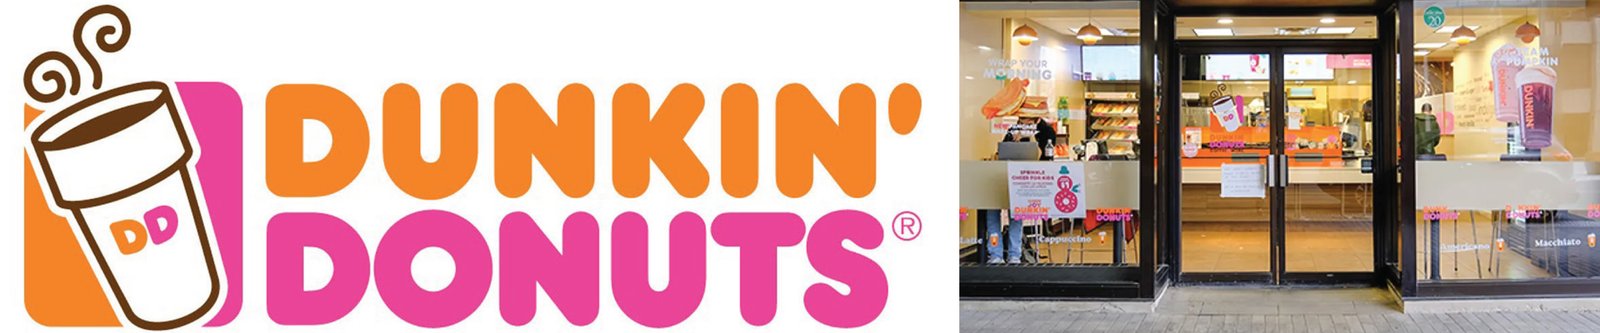 dunkin donuts franchise